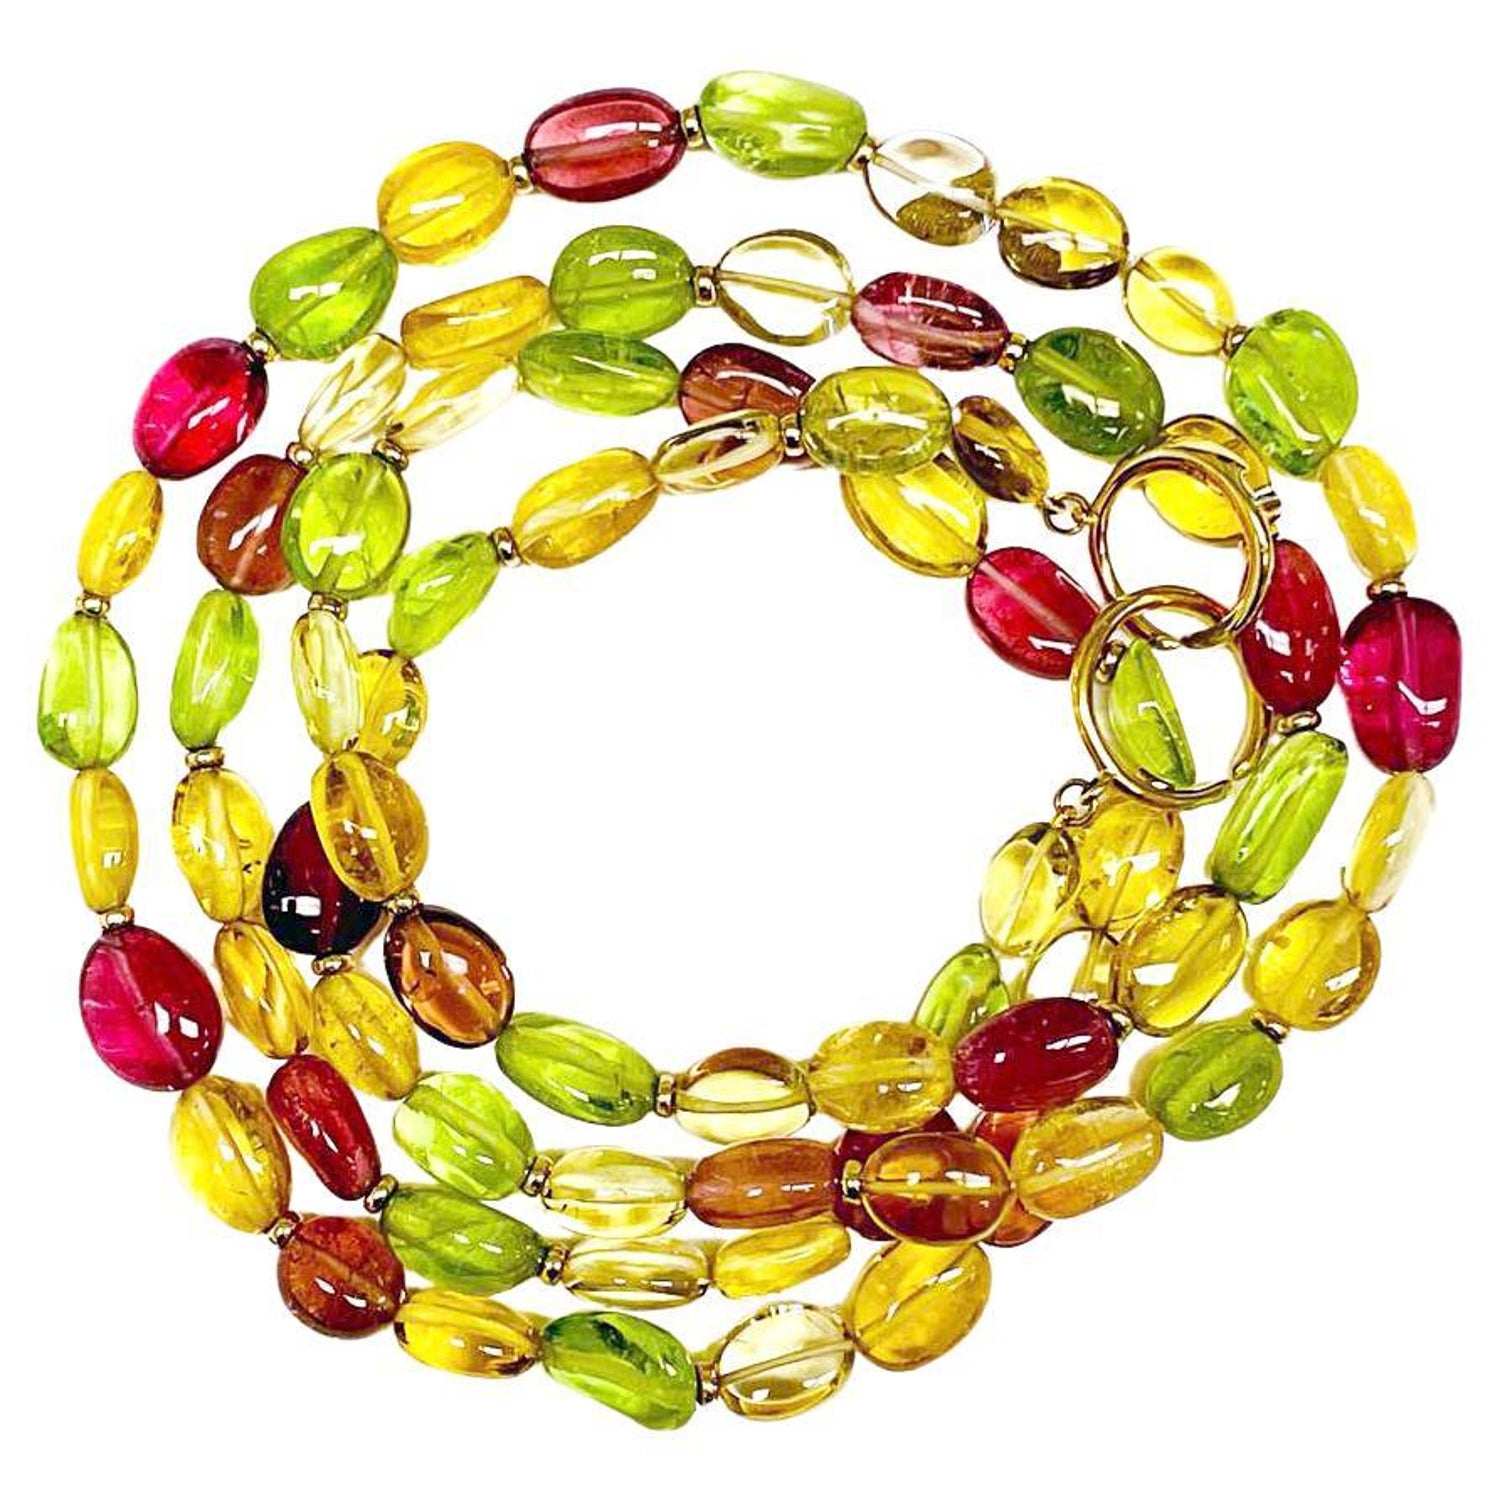 The Beadery Element Beads Peridot 1/4 lb (Sale) 1476-653 – Beadery Products